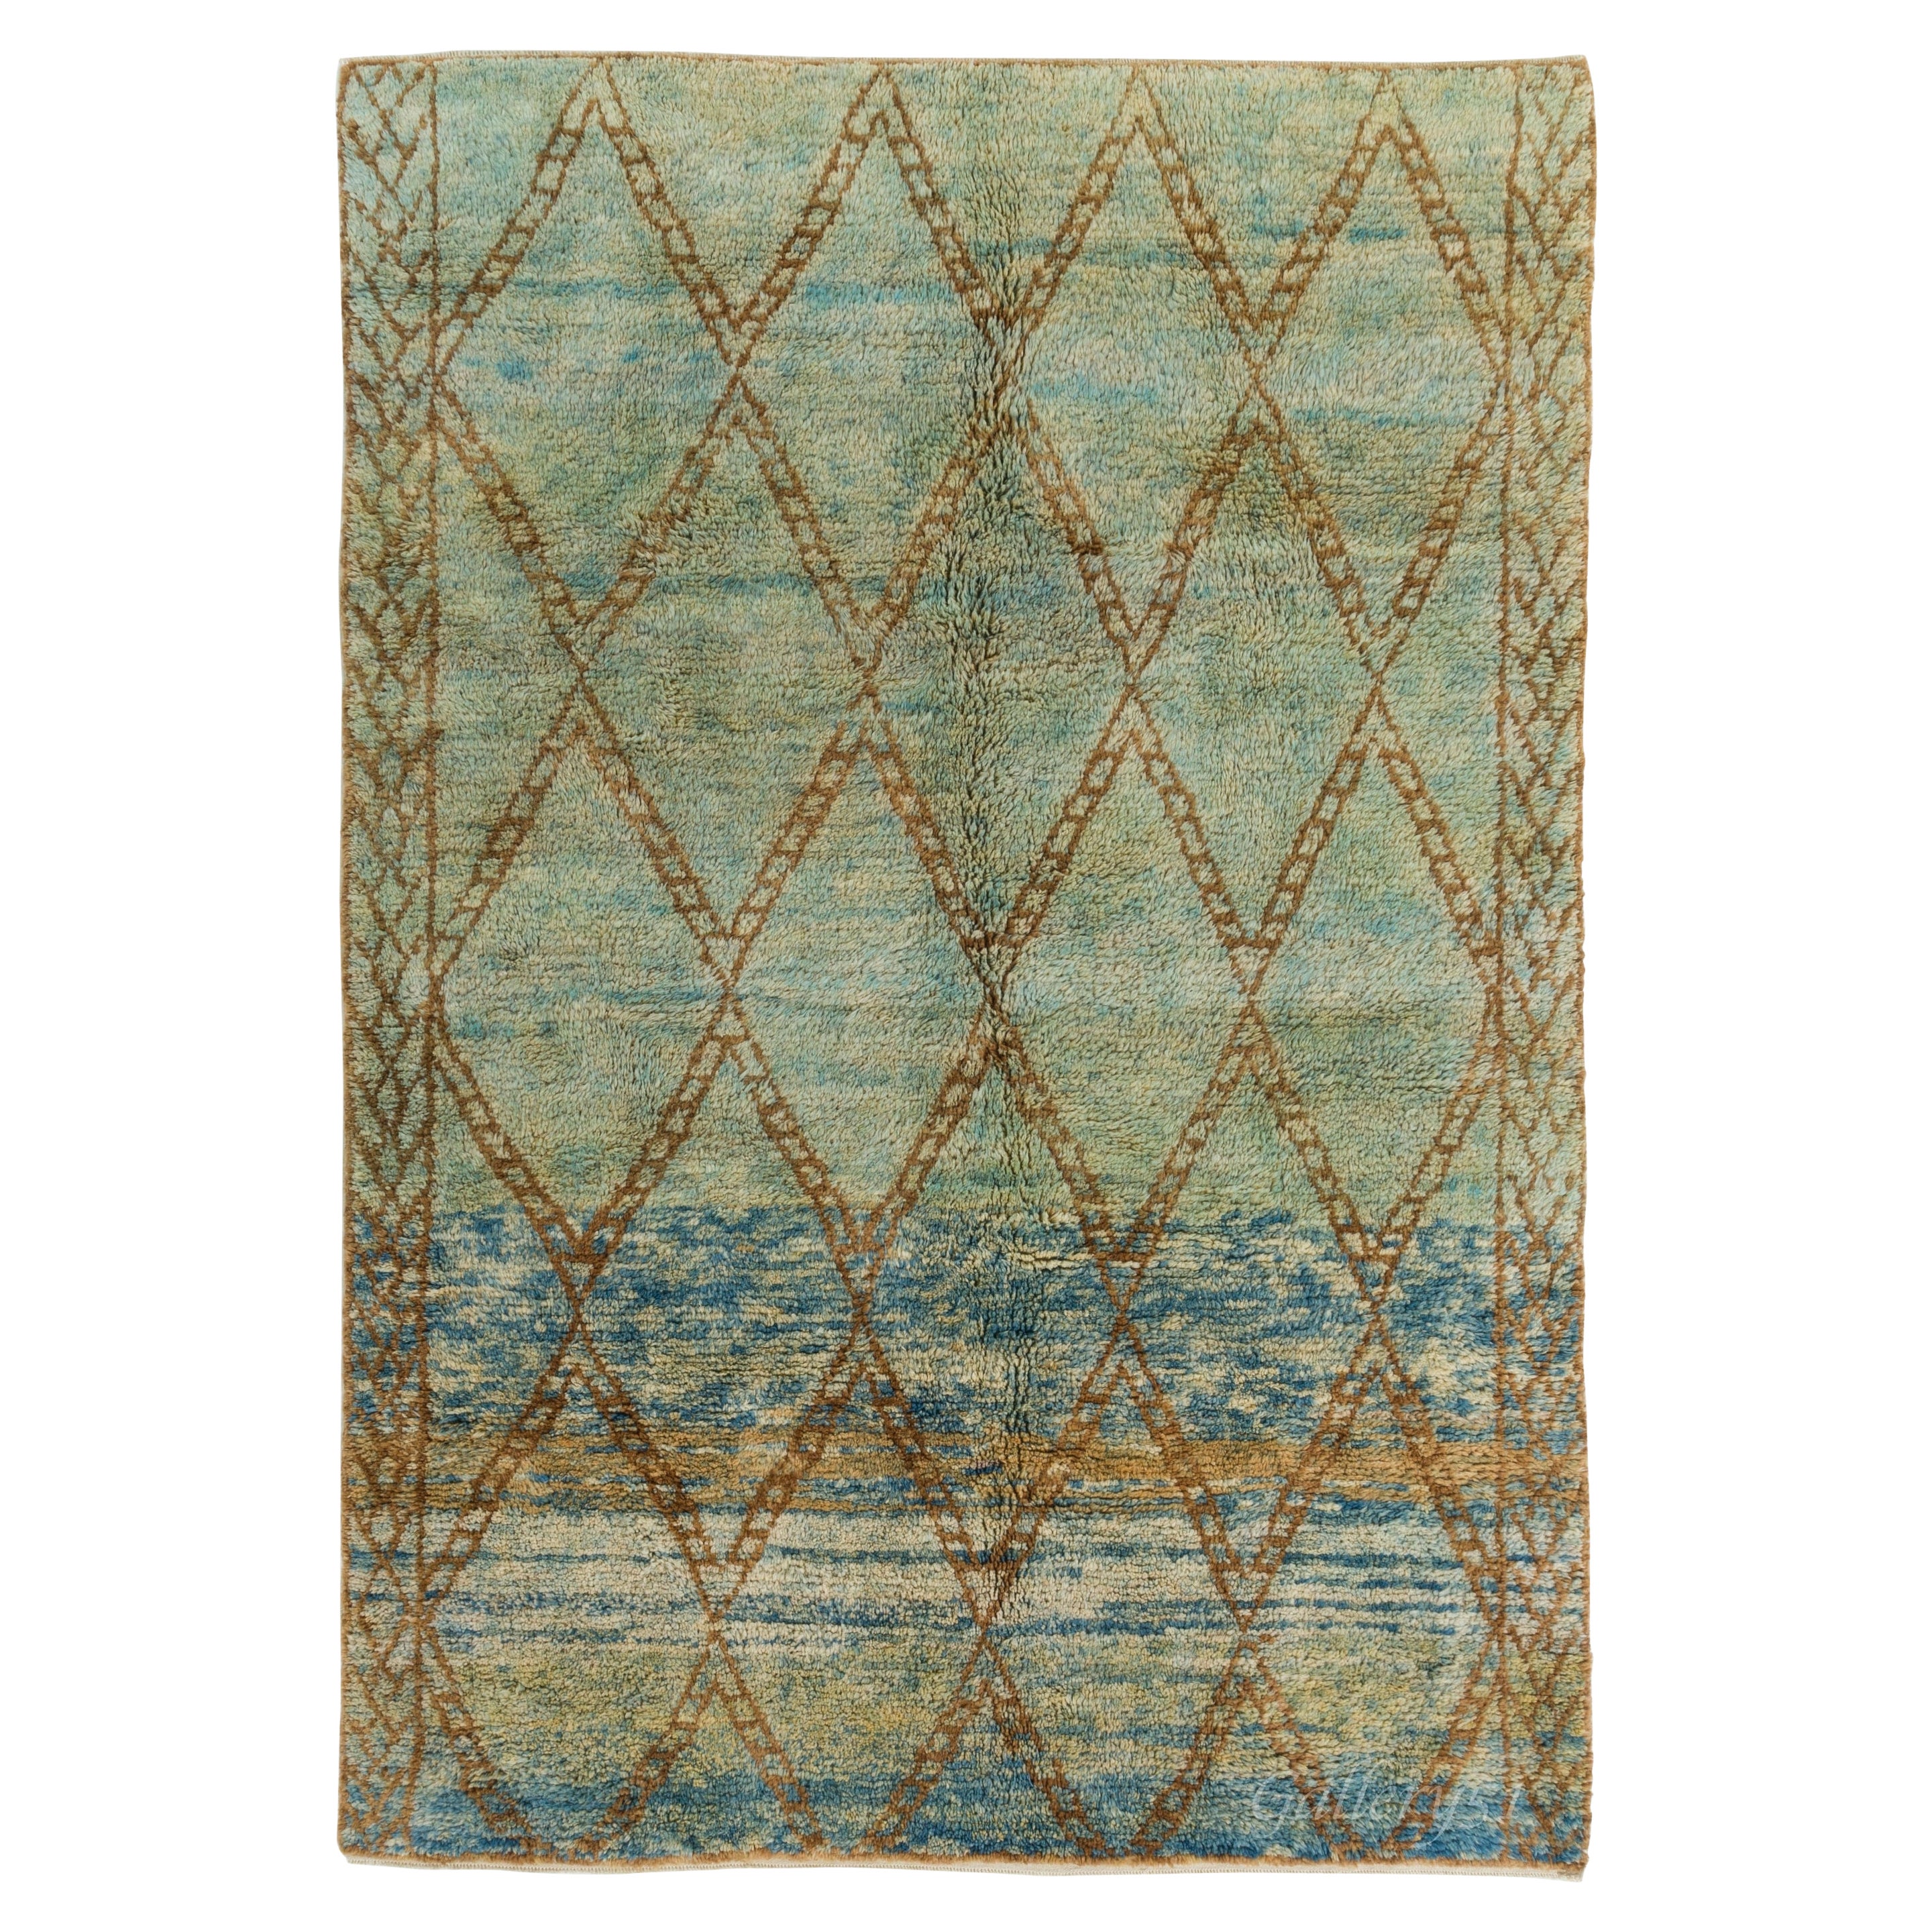 7x10 Ft Modern Moroccan Berber Wool Rug. Hand-knotted in Green, Blue & Brown For Sale